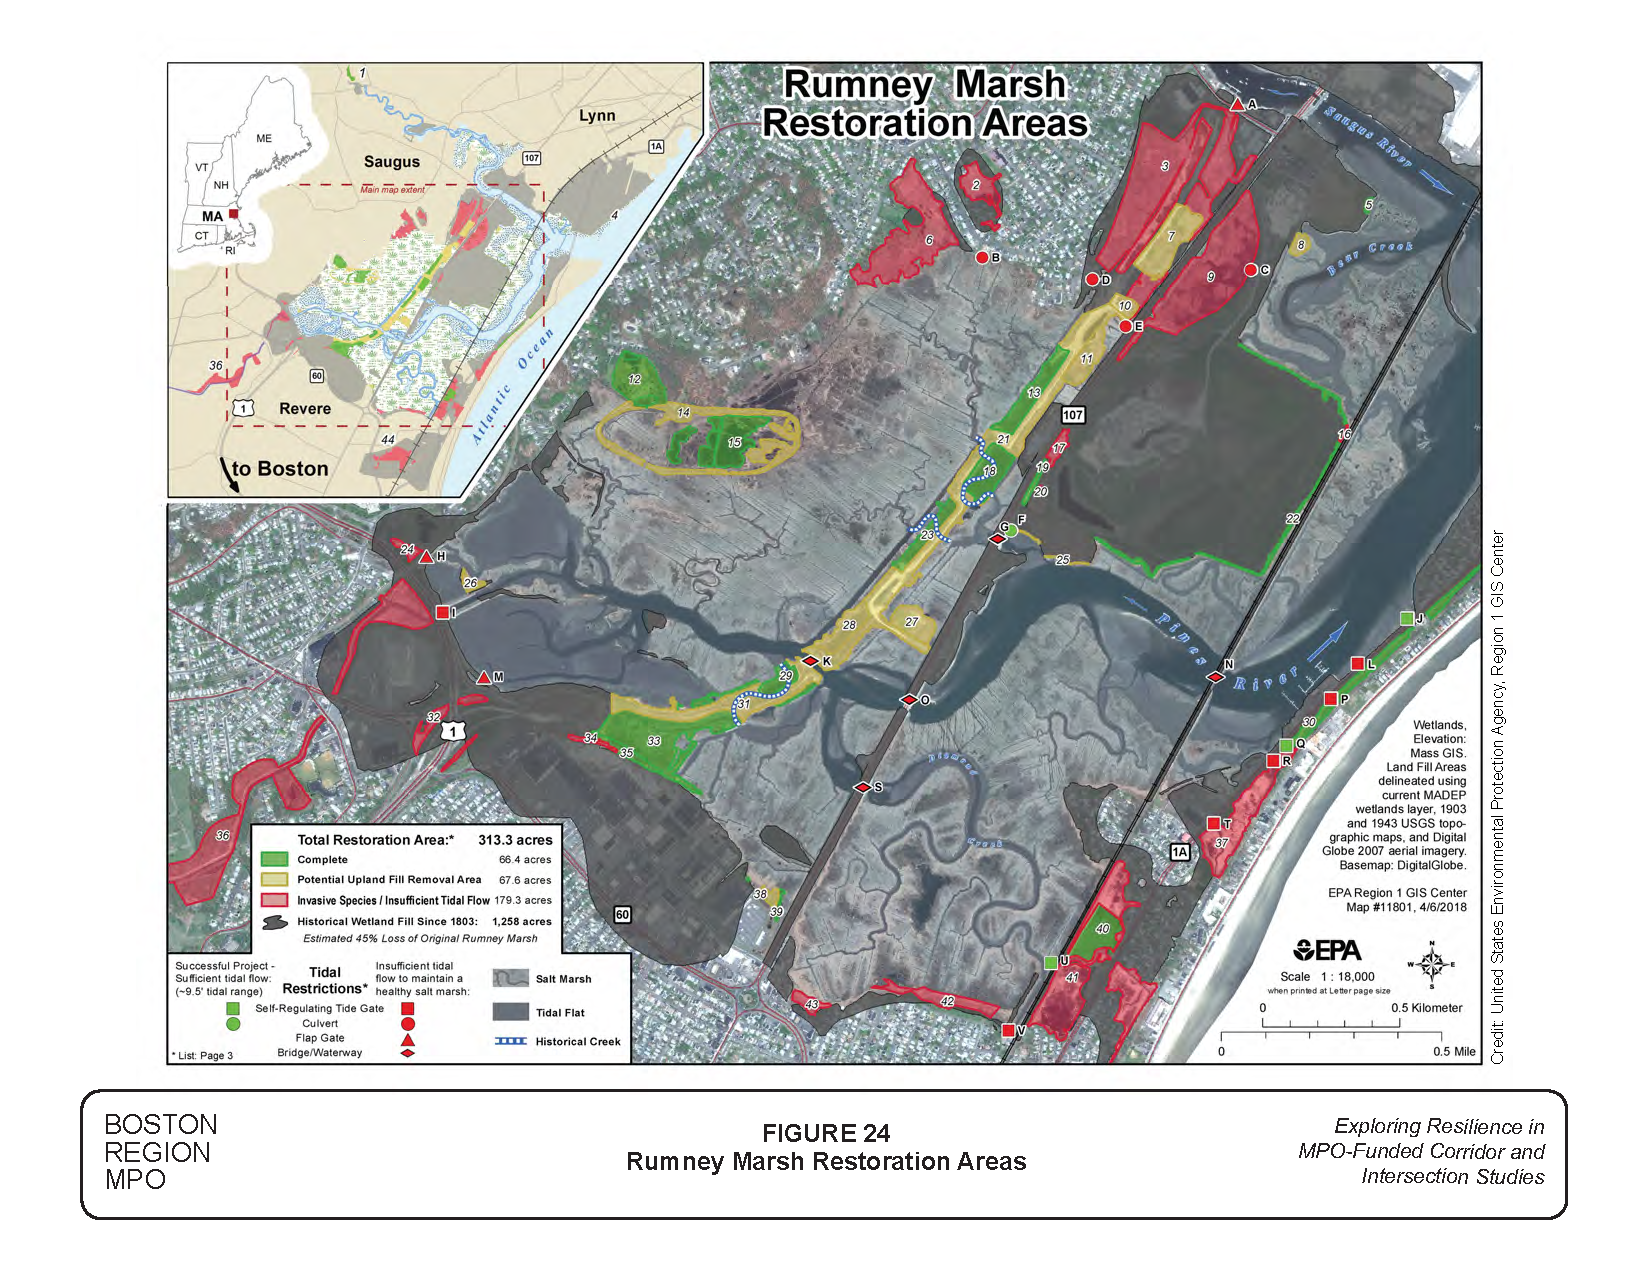 Figure 24 is a map of the study area showing locations of saltwater marshes and invasive Phragmites where tidal flows have been restricted in the Rumney Marsh Reservation